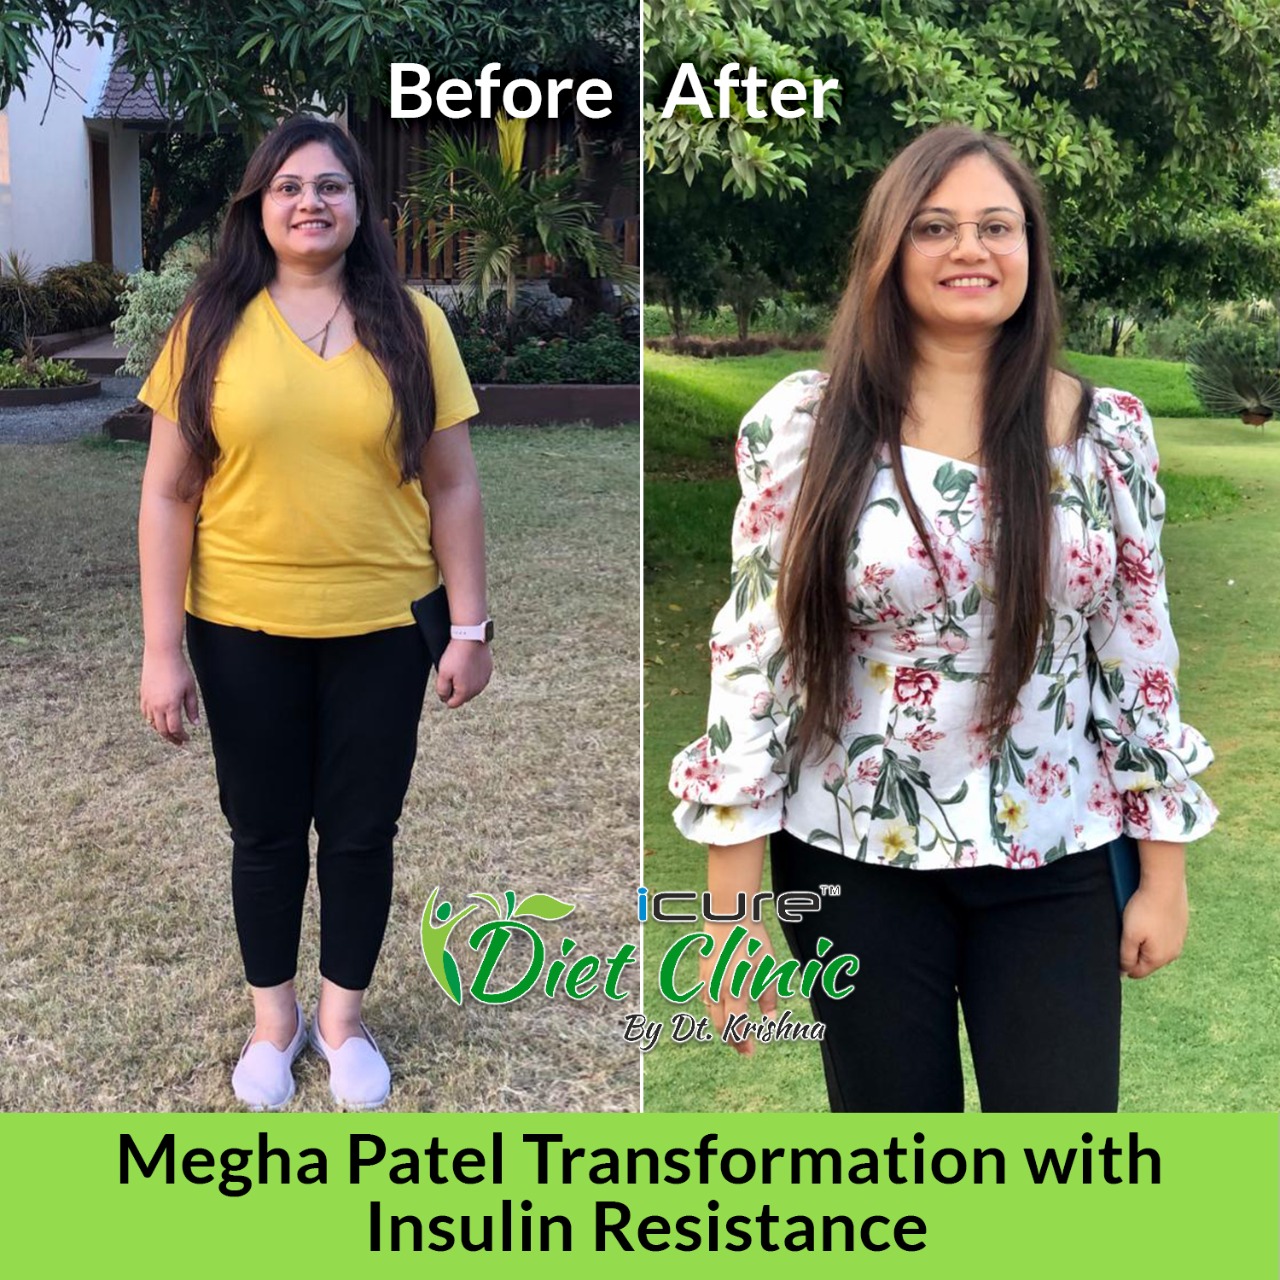 Megha Patel transformation with Insulin Resistance